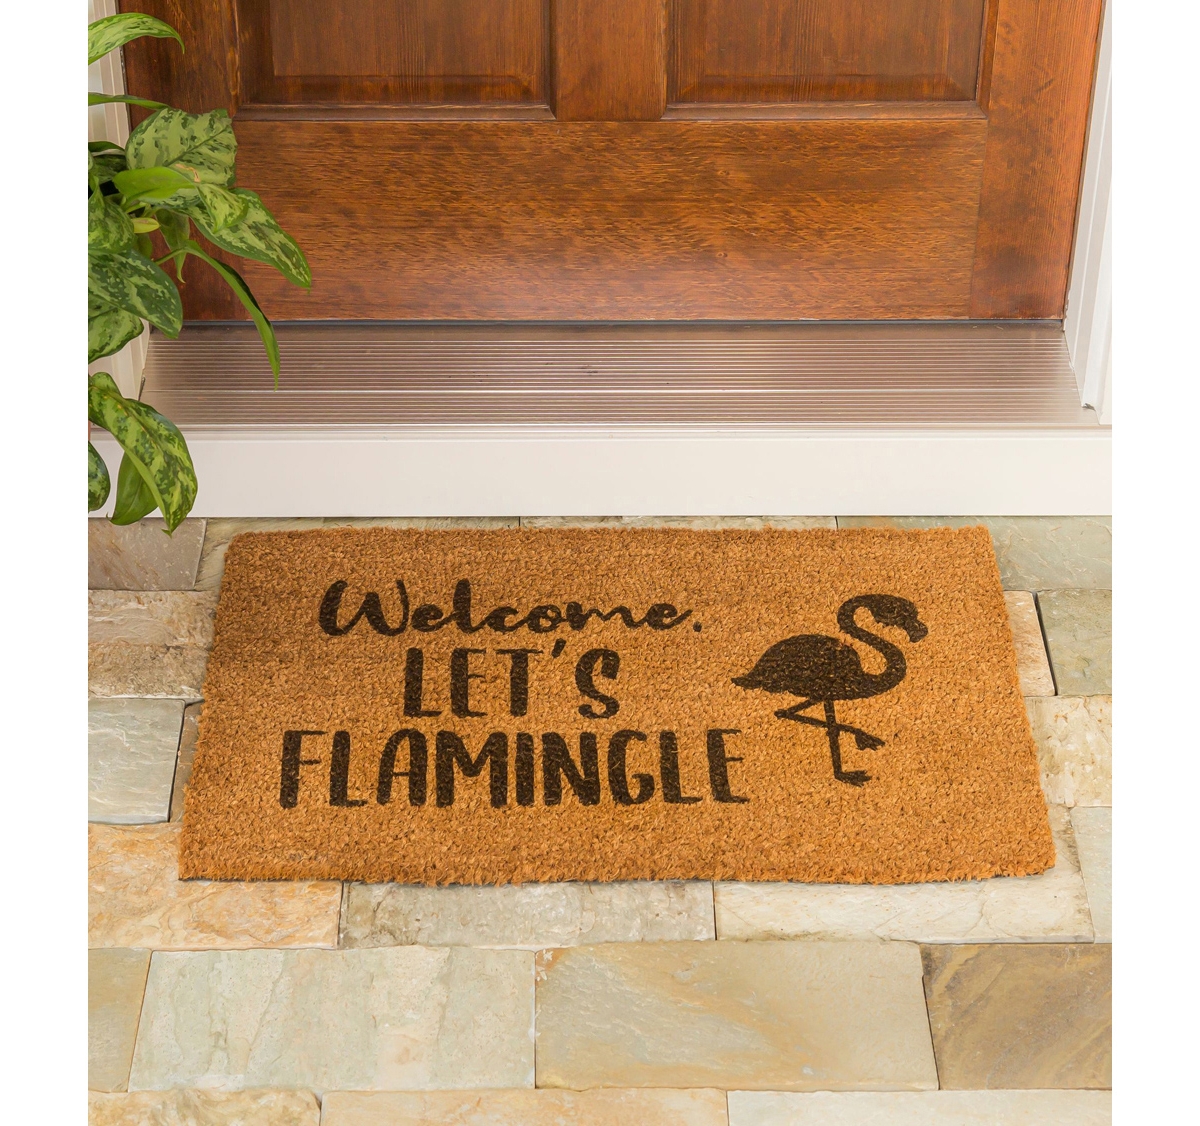 Evergreen "welcome, Let's Flamingle" In Multicolored